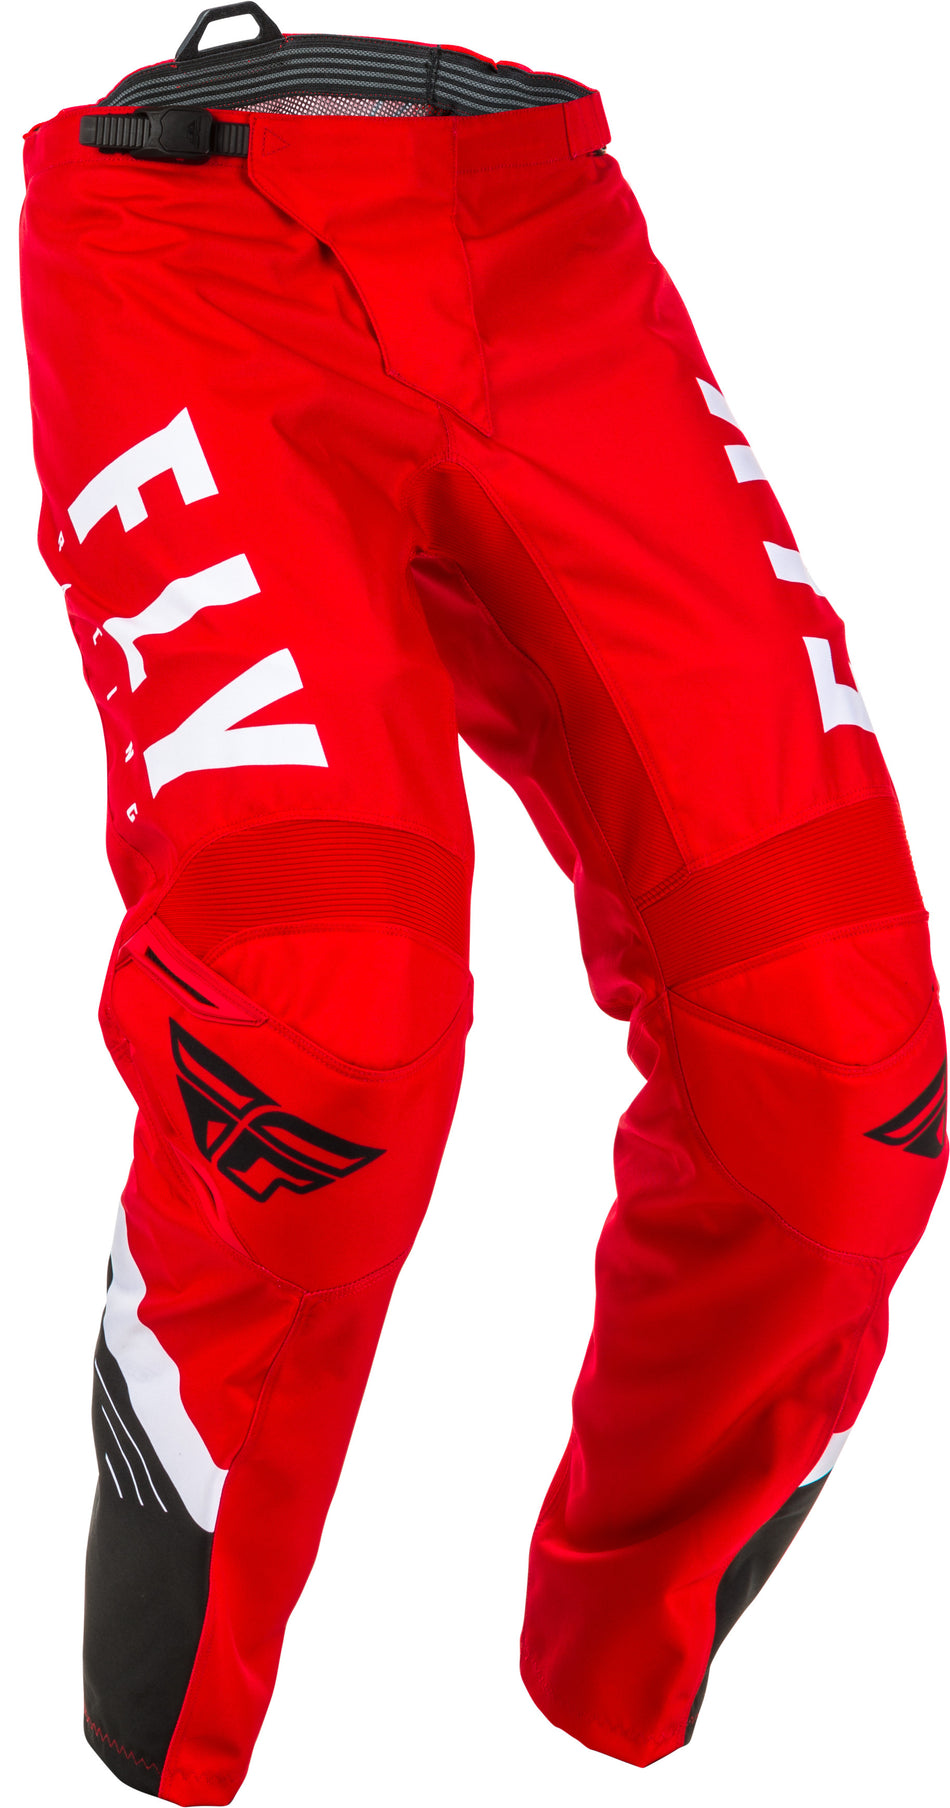 FLY RACING F-16 Pants Red/Black/White Sz 42 373-93342